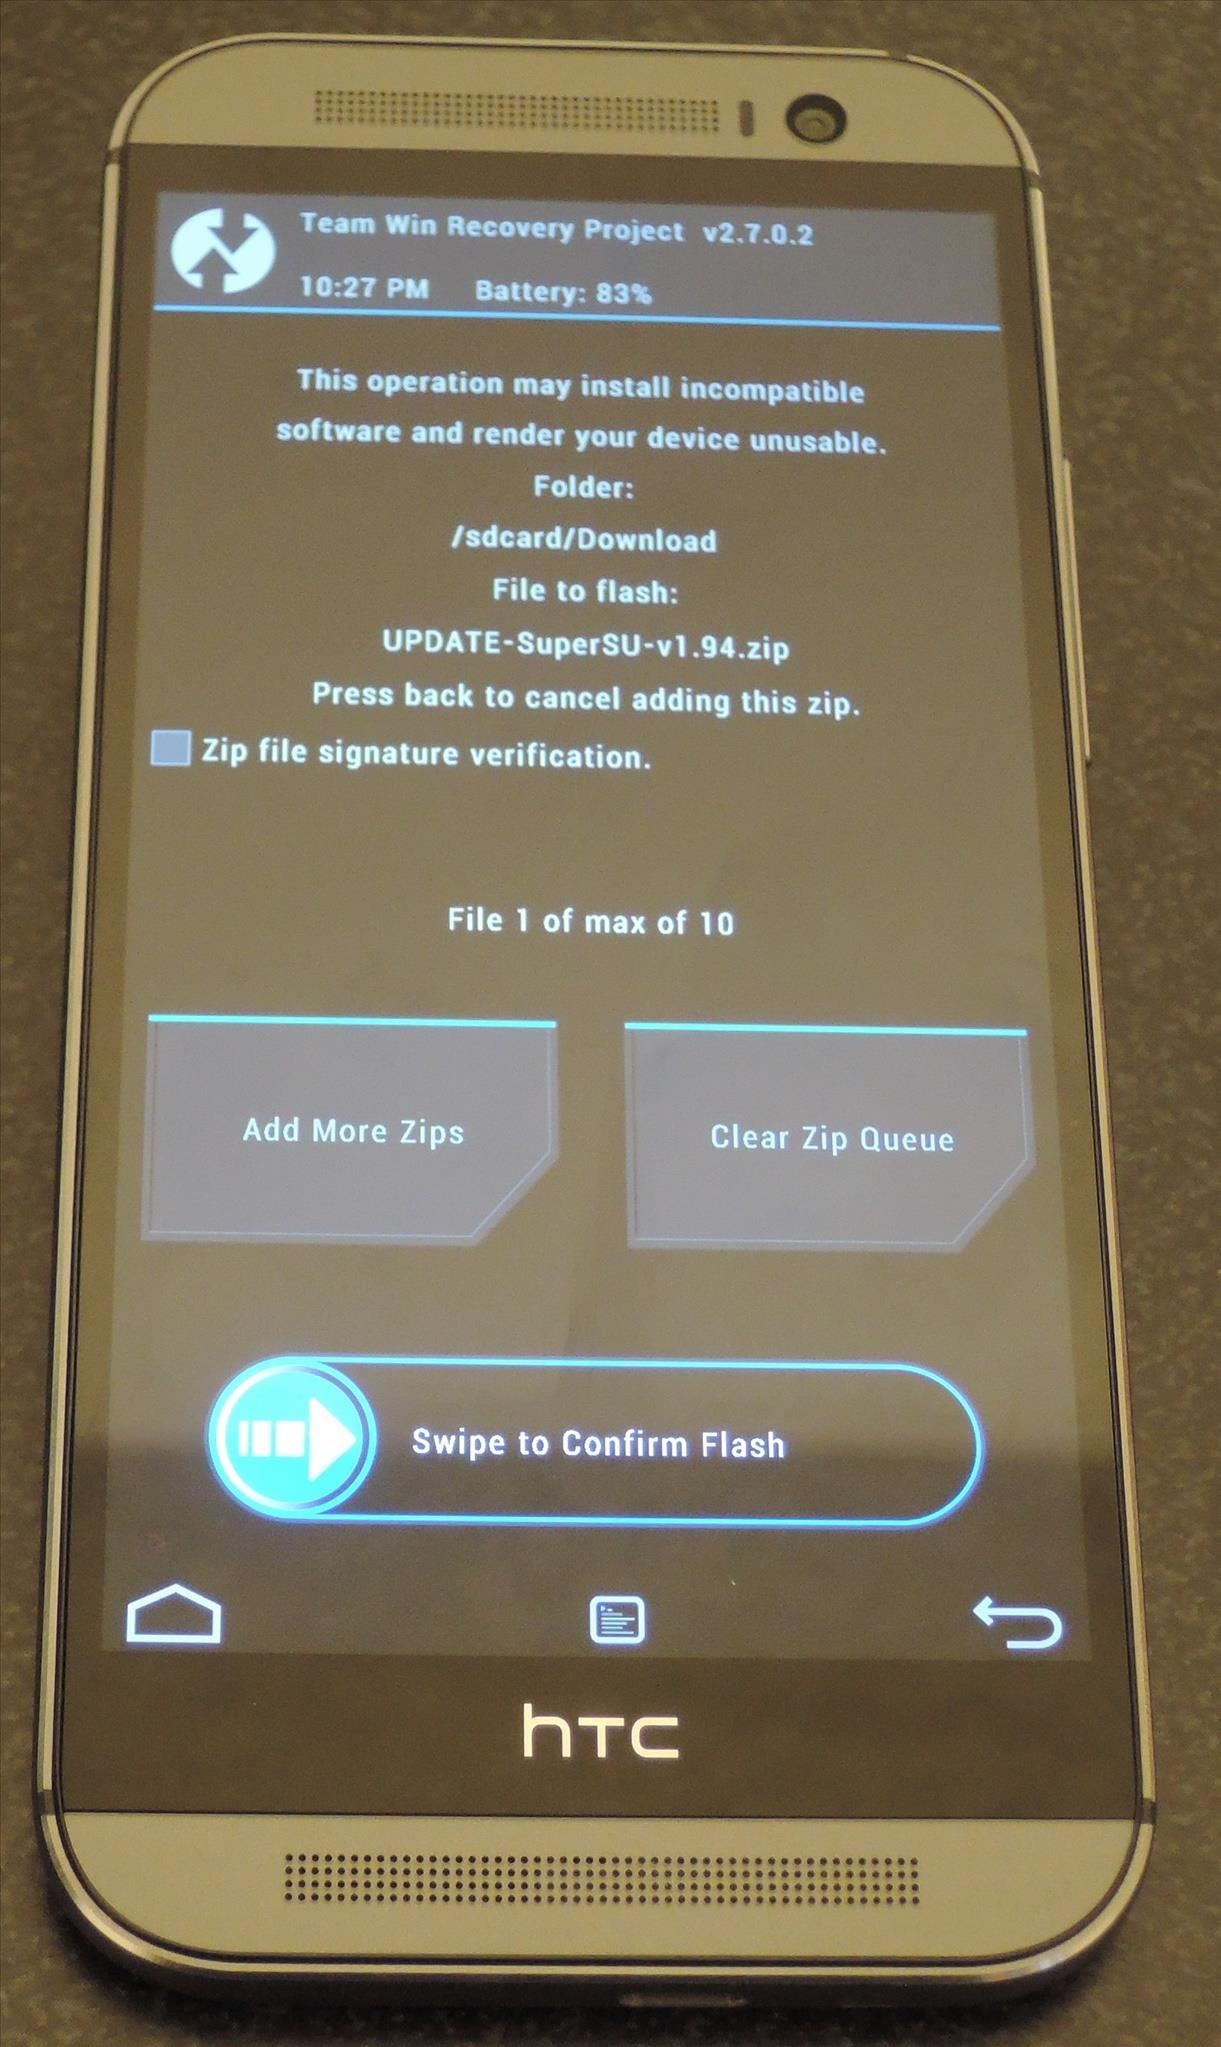 How to Unlock the Bootloader & Root Your HTC One M8